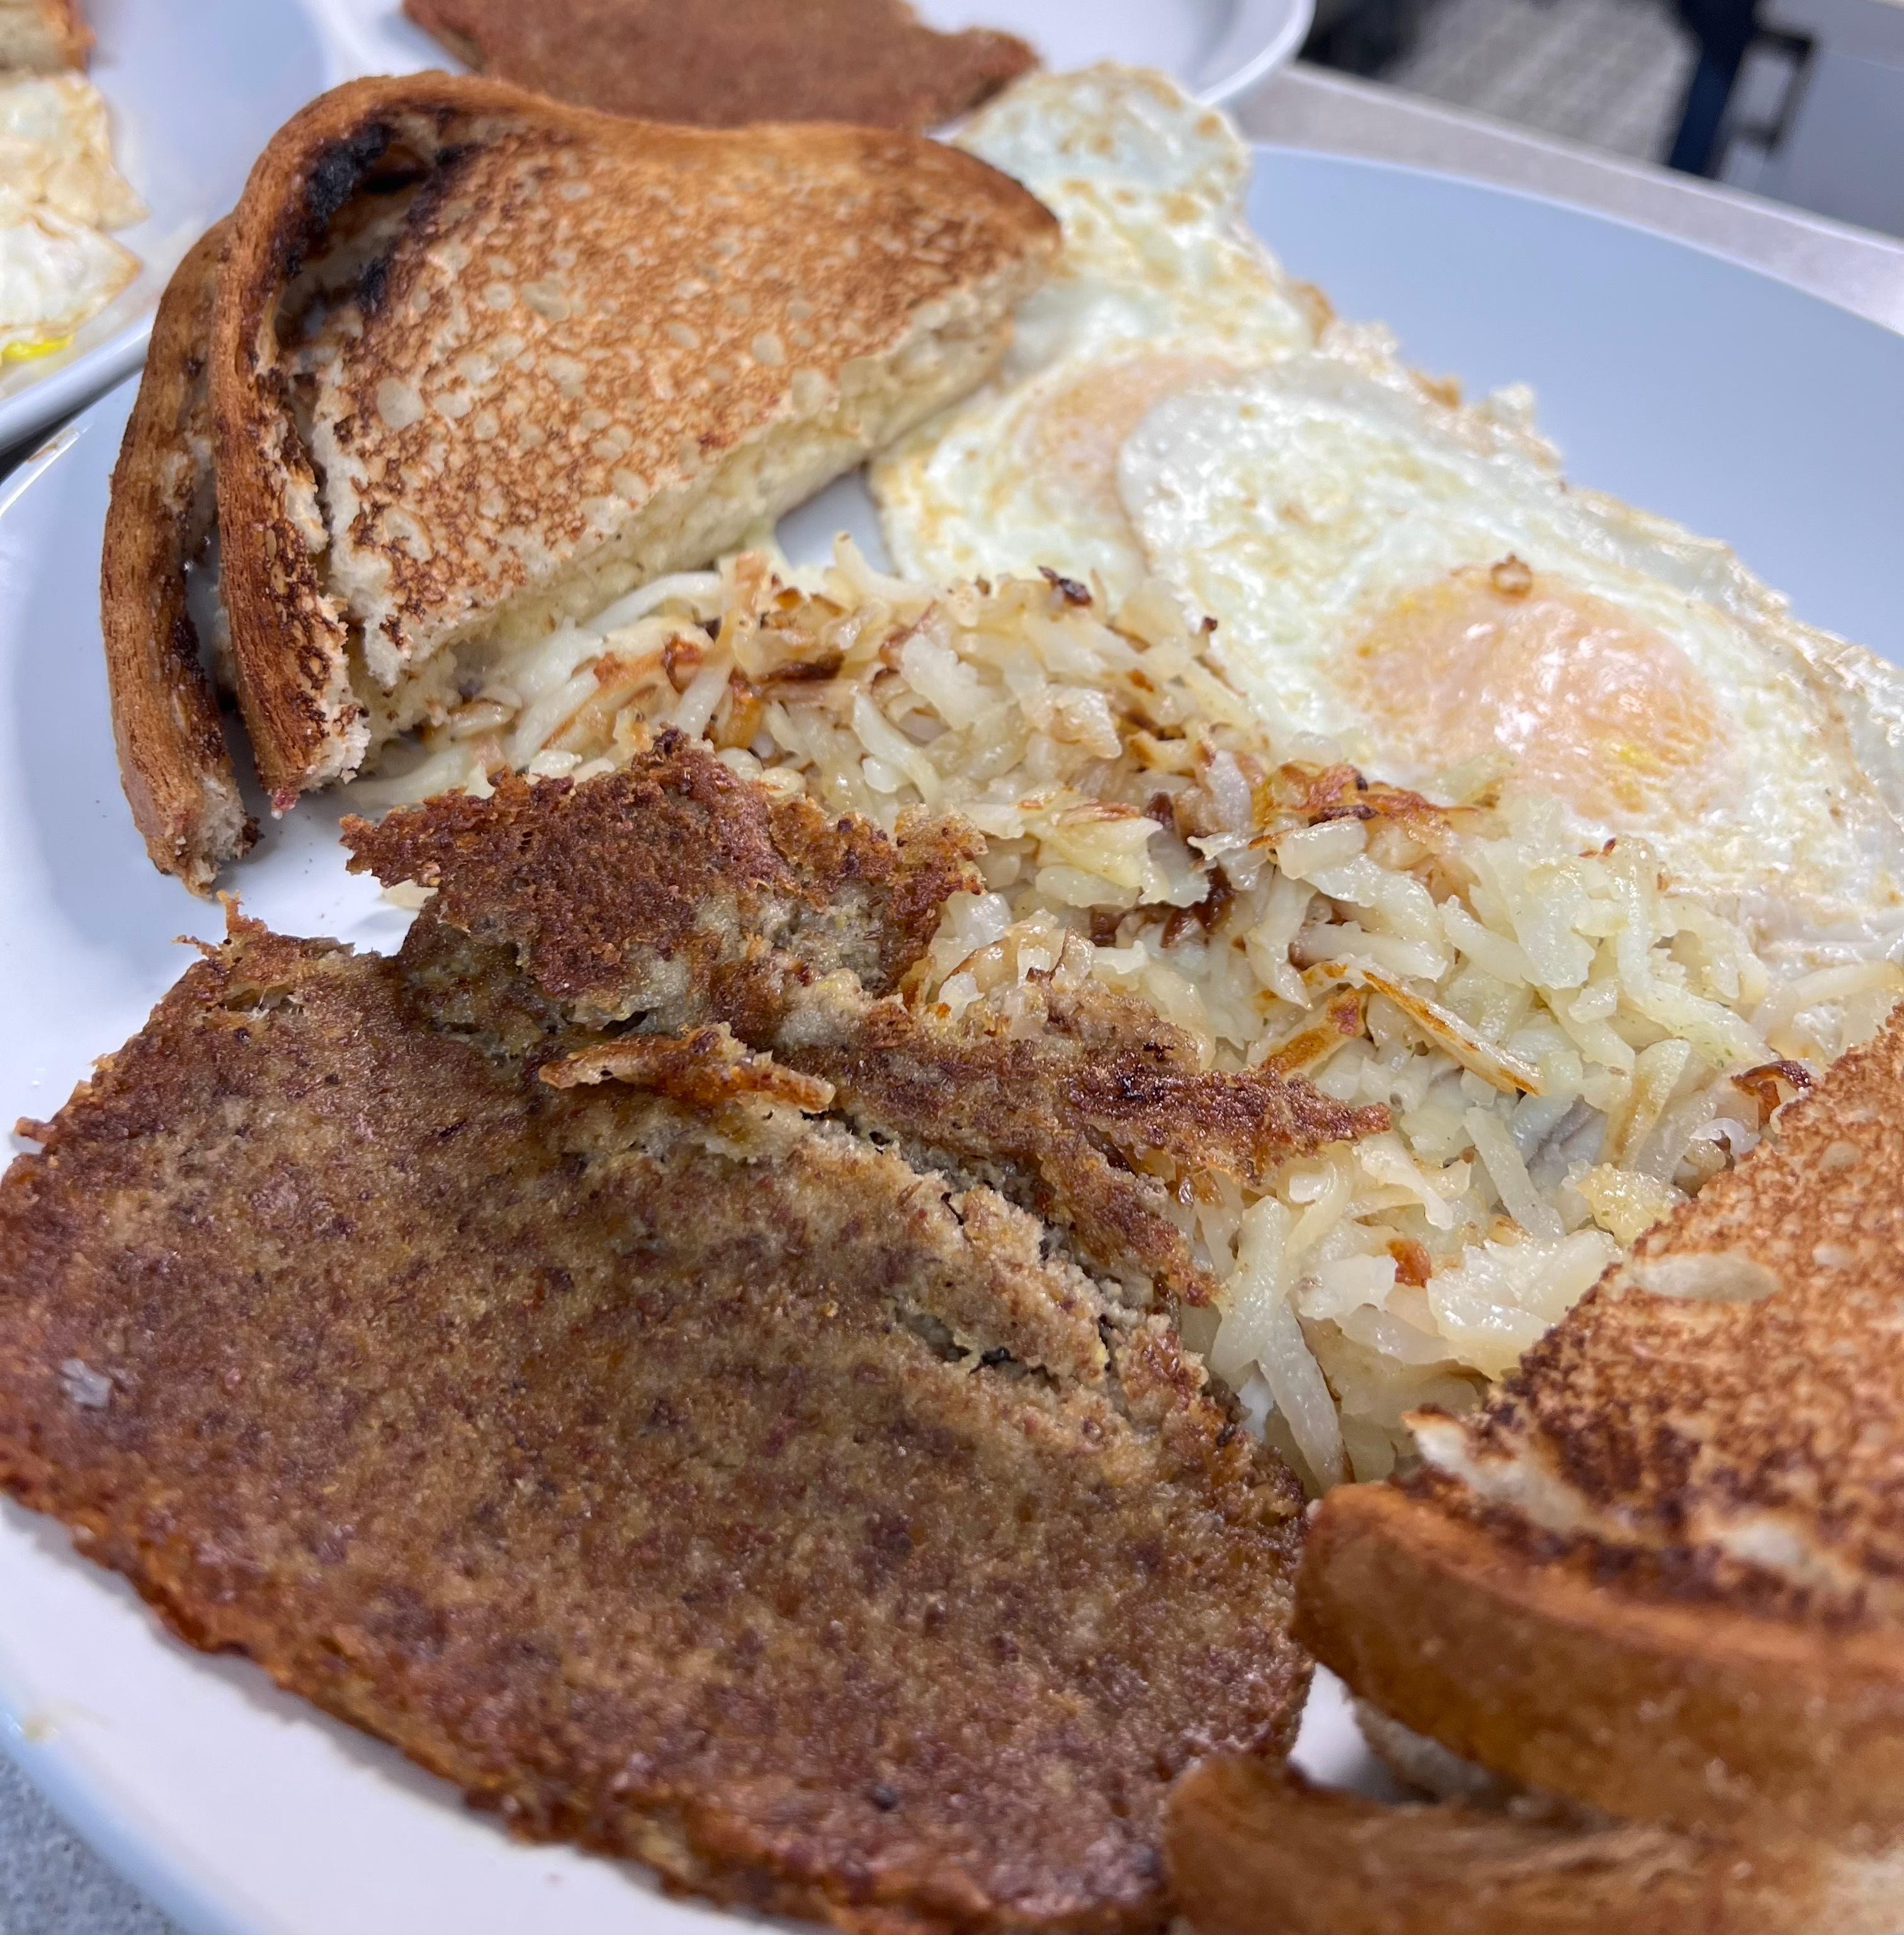 #3 Two eggs any style with scrapple